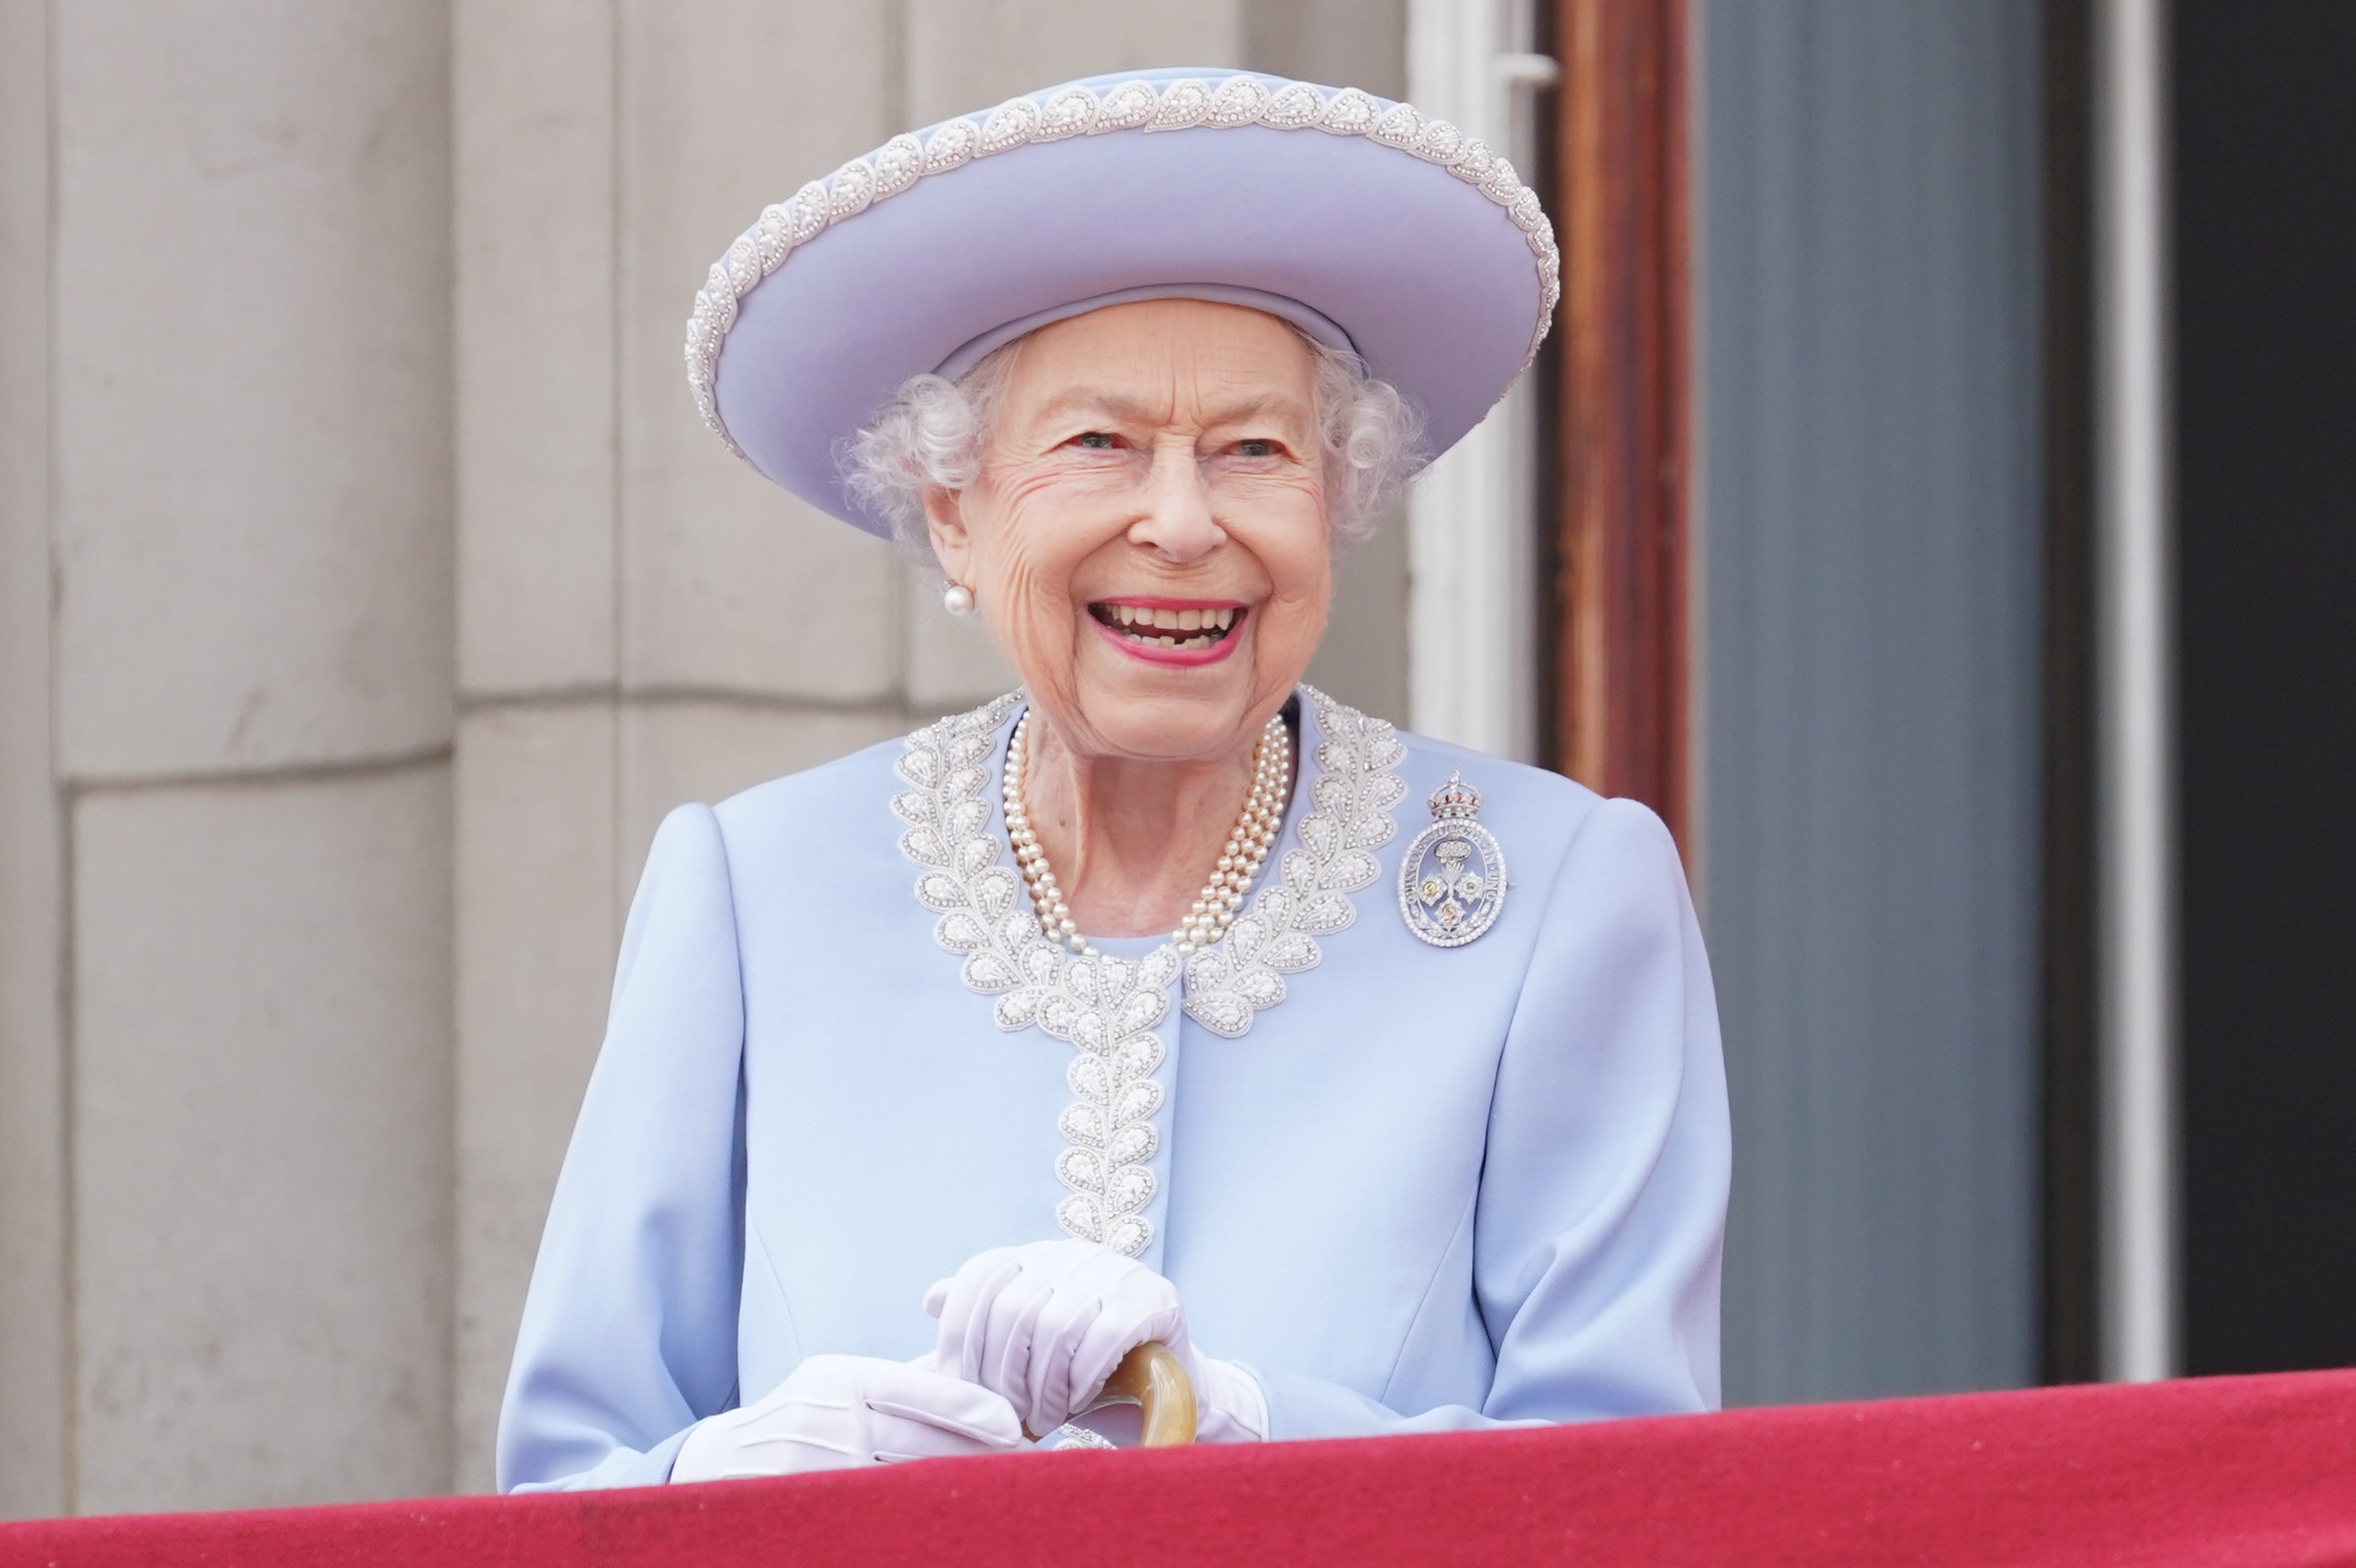 The Queen watches from the balcony during the Trooping the Colour ceremony at Horse Guards Parade (Jonathan Brady/PA)